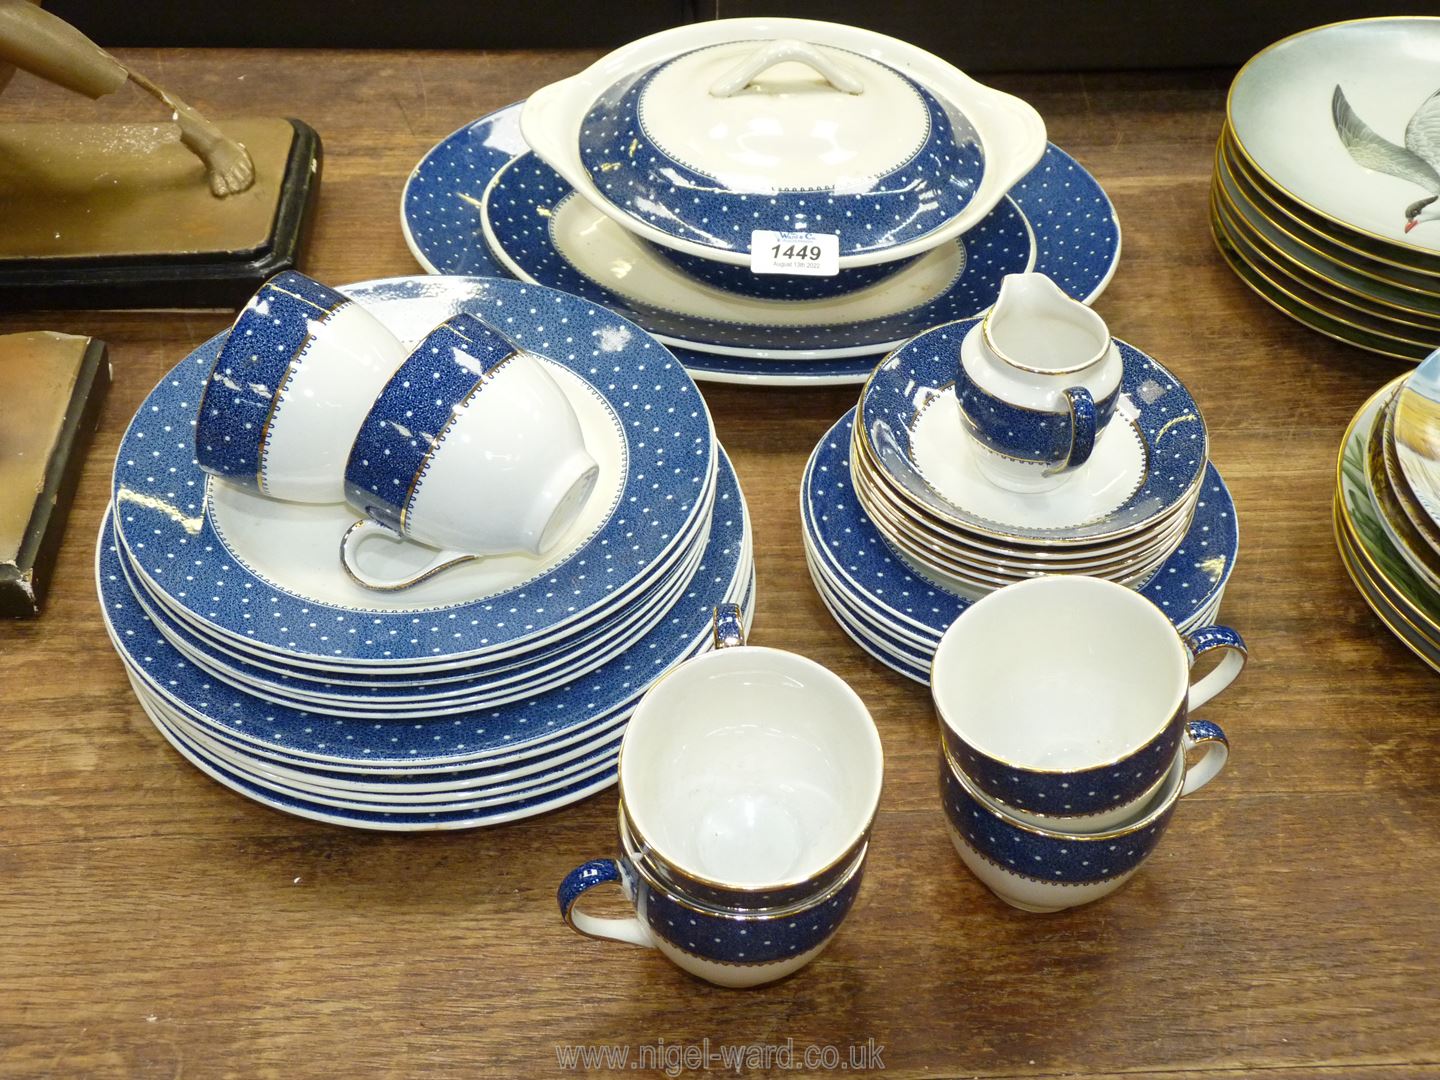 A Ridgeway 'Conway' part dinner and tea ware having blue polka dot border including 6 cups and